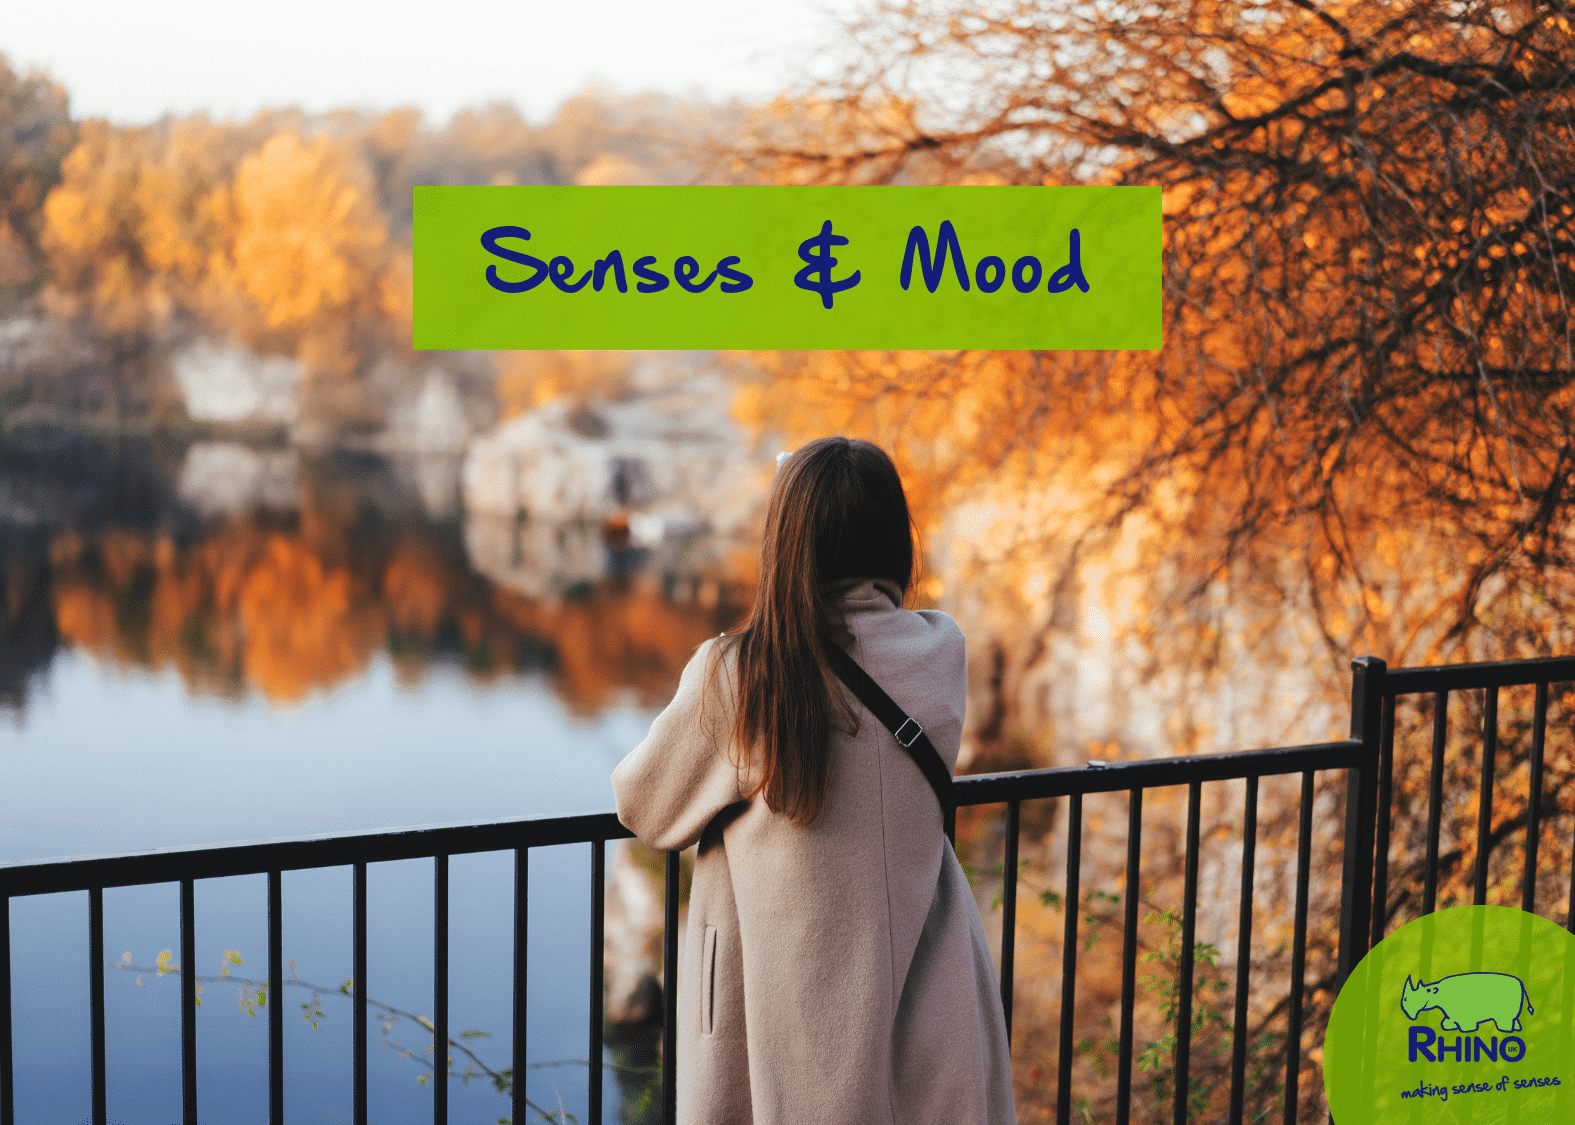 How Our Senses Affect Our Mood